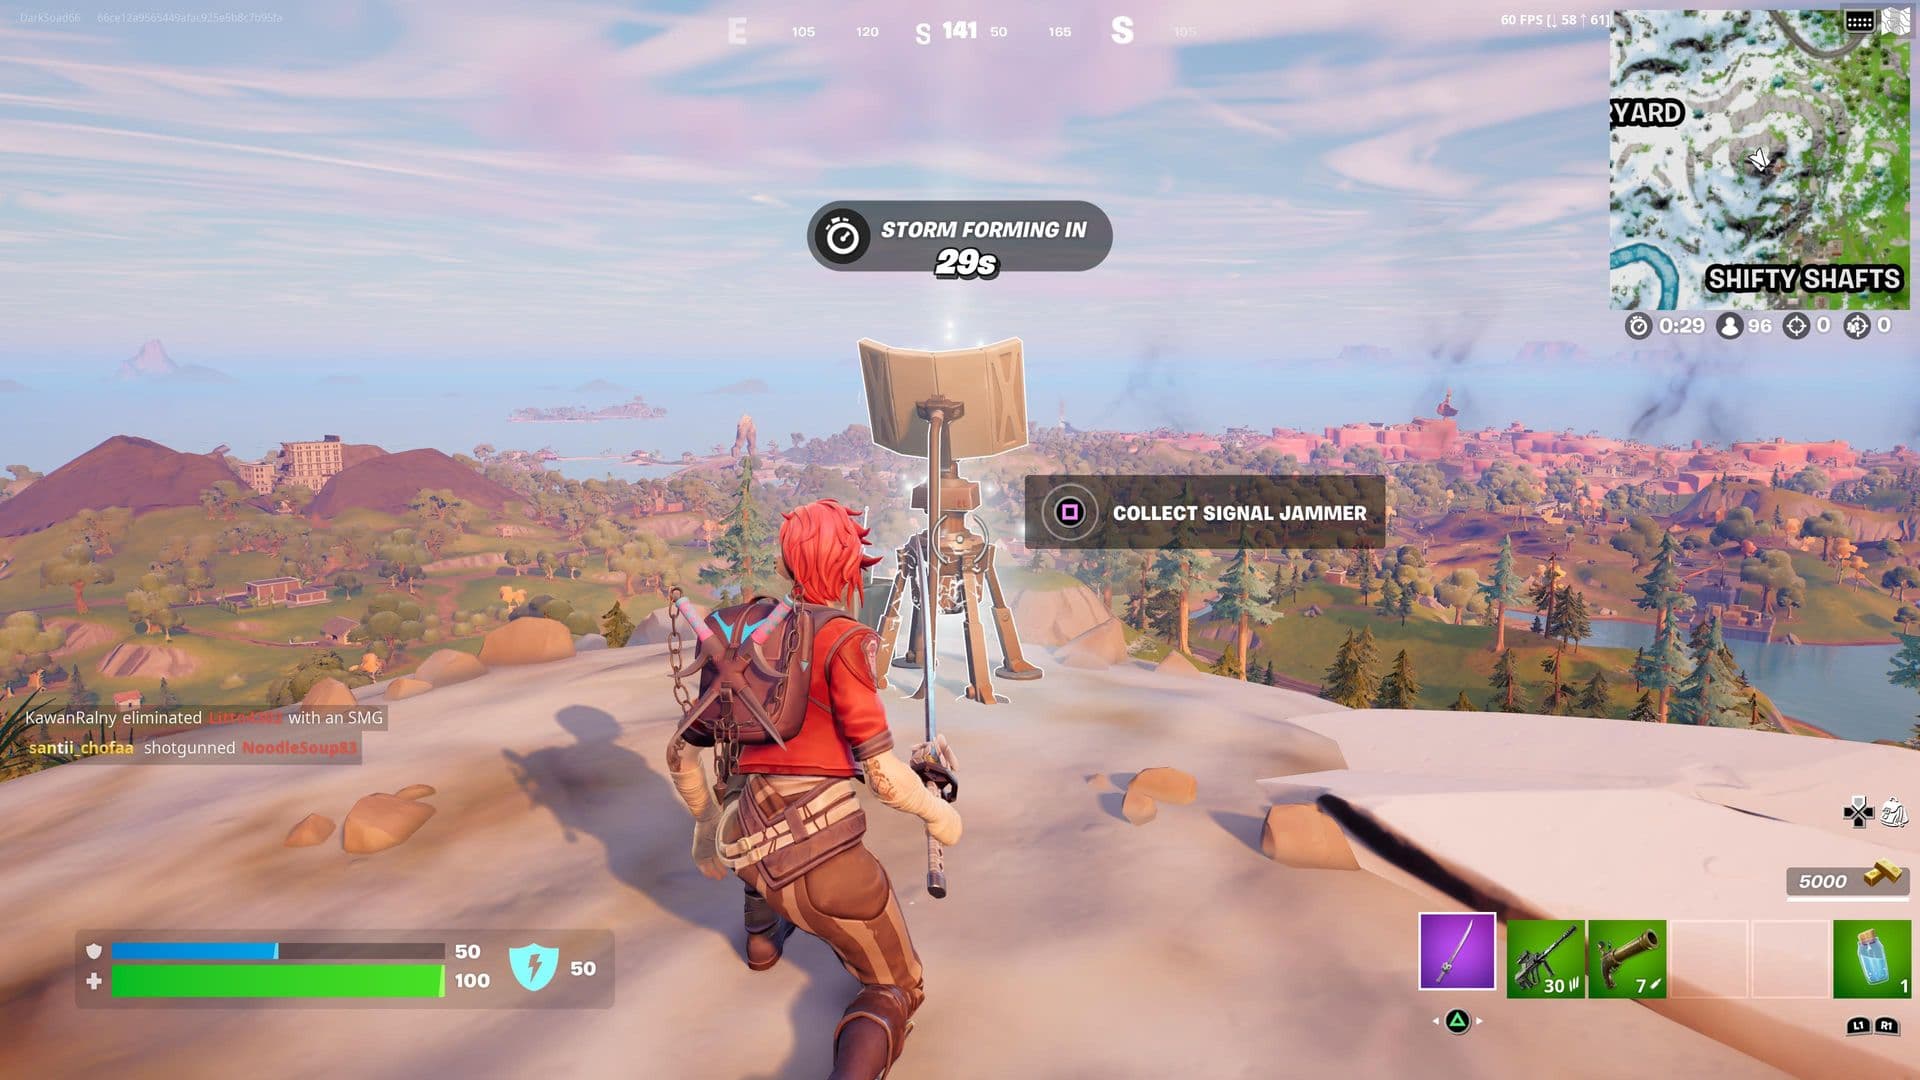 Fortnite Collect Signal Jammers Guide: Where to Find Signal Jammers